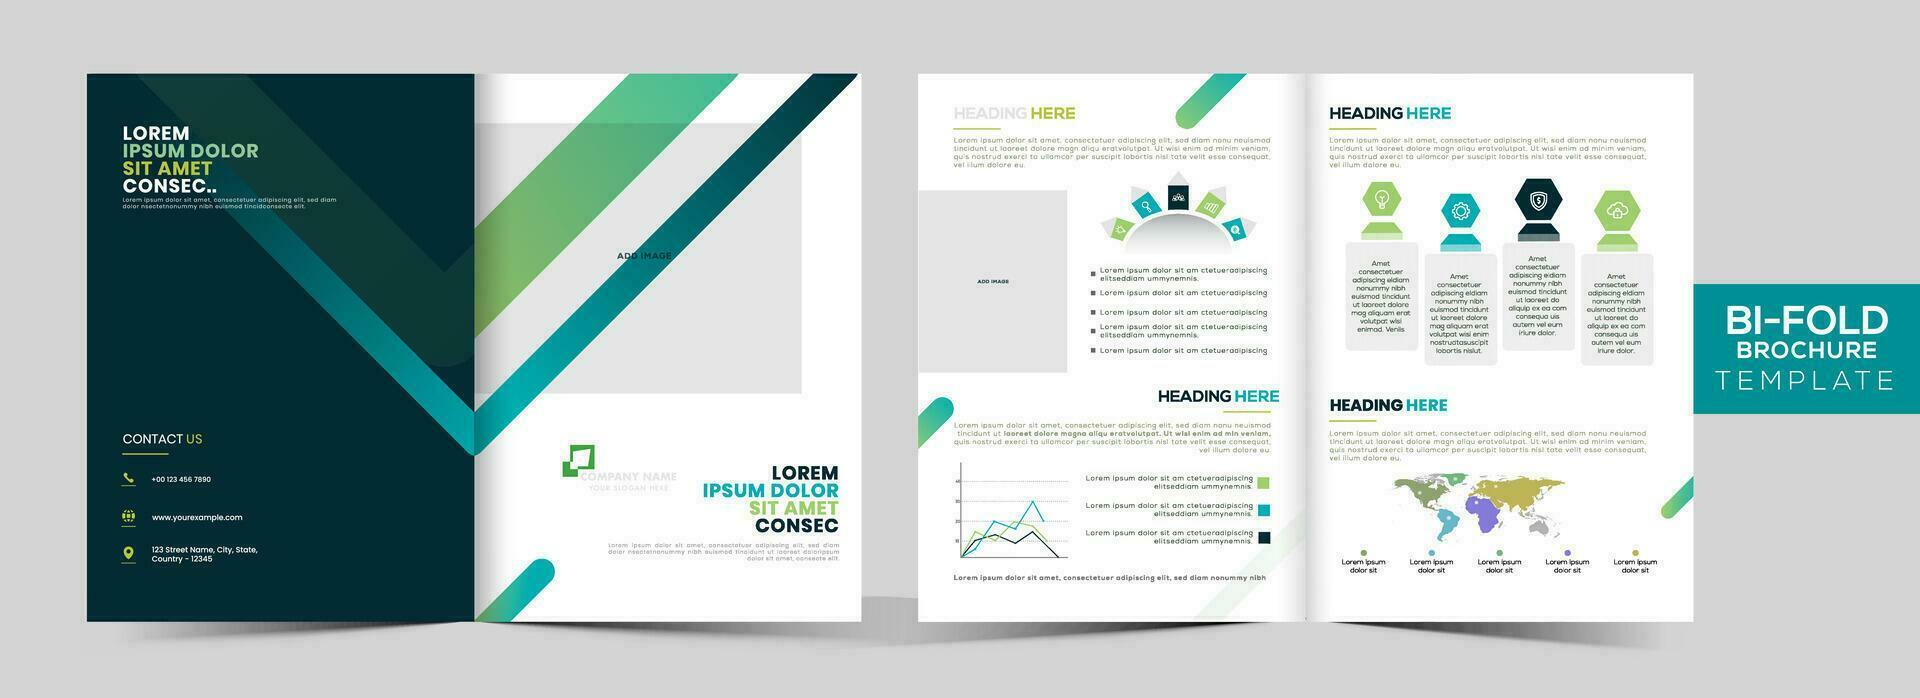 Front and Back View of Business Bi-Fold Brochure Template Layout, Annual Report in Green and White Color. vector